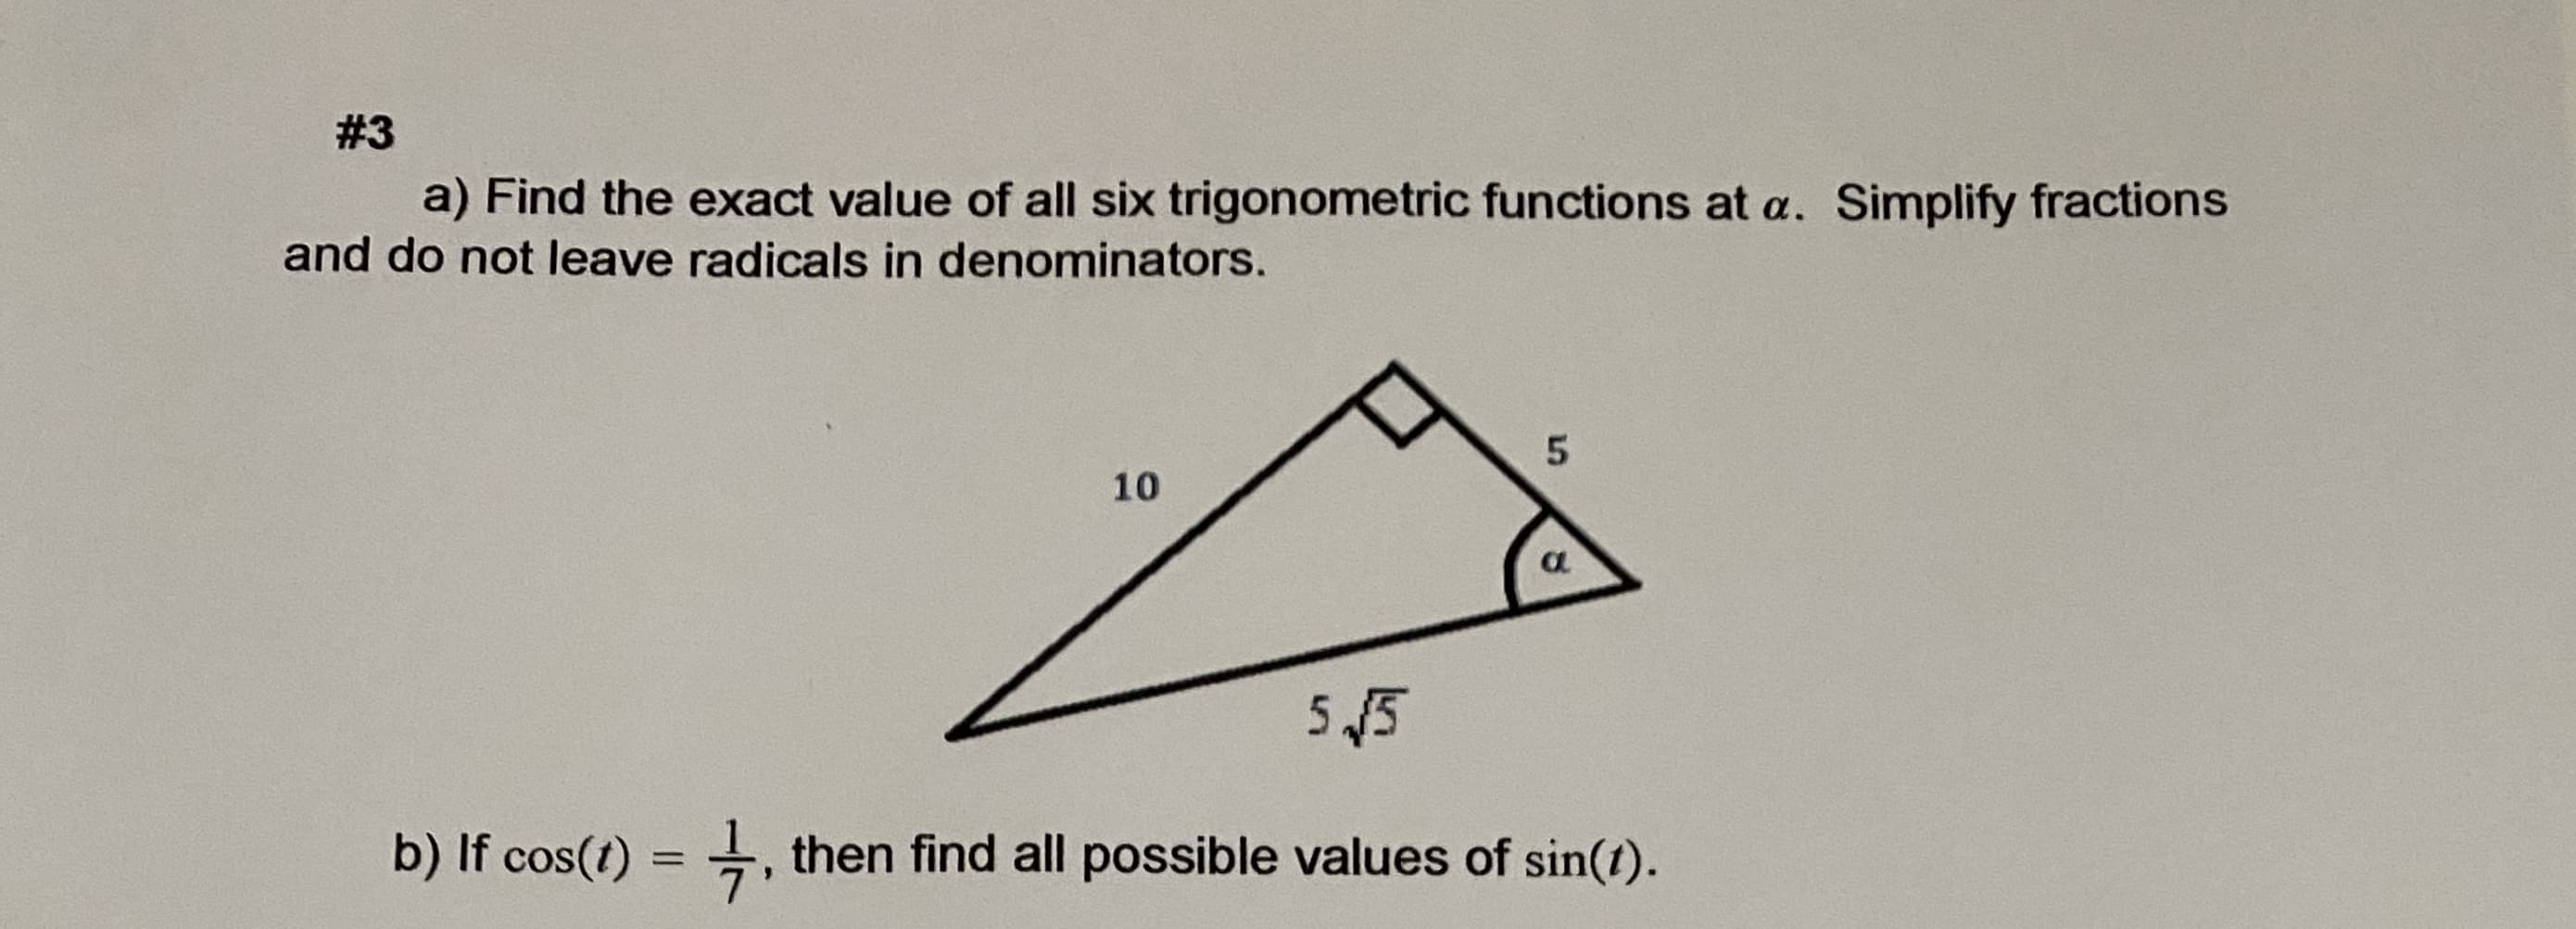 a) Find the exact value of all six trigonometric functions at a. Simplify fractions
and do not leave radicals in denominators.
10
a
5 45
b) If cos(t) = , then find all possible values of sin(t).
4.
